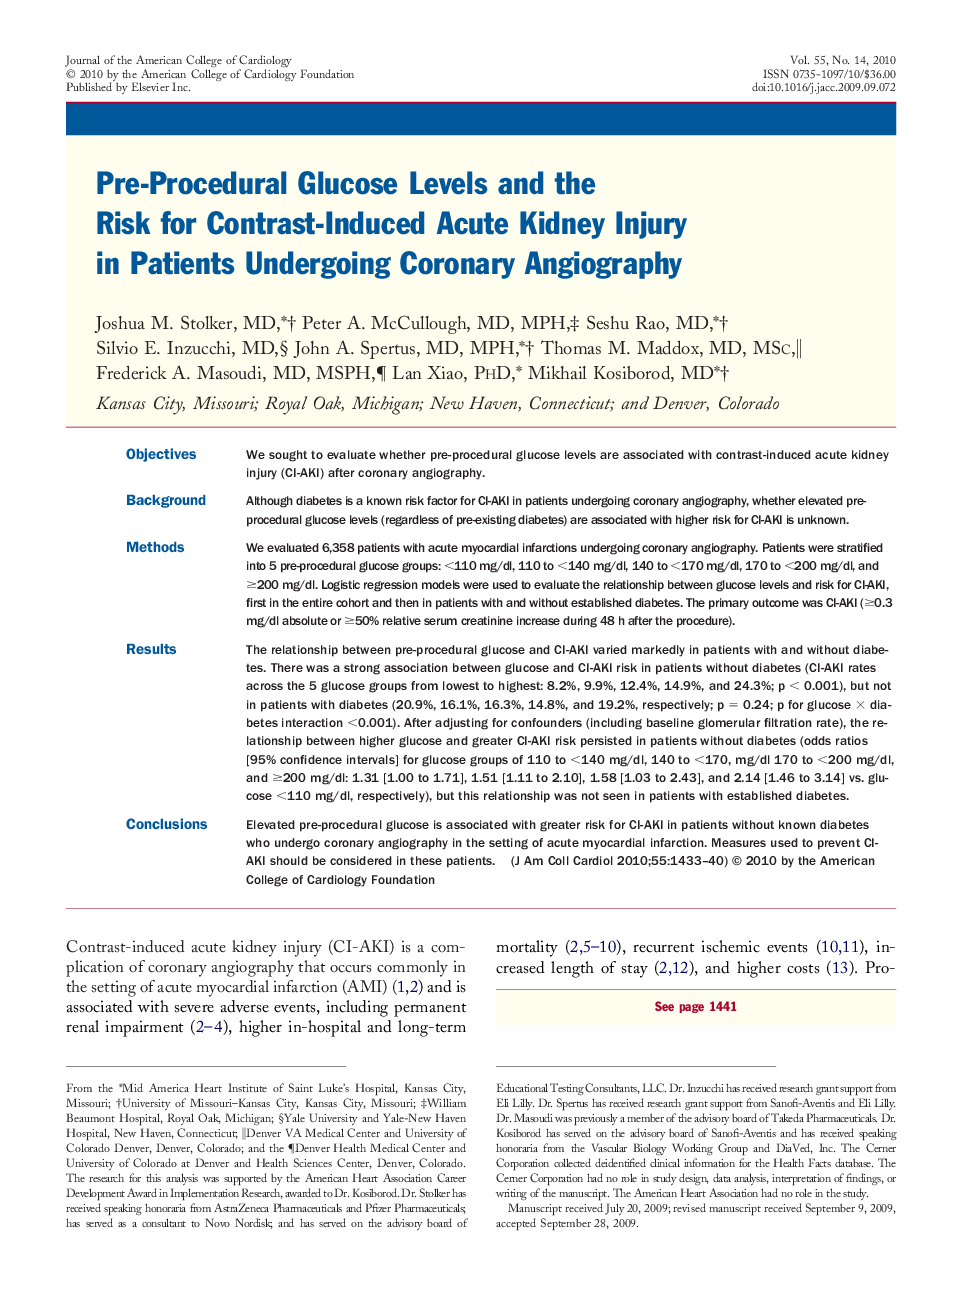 Pre-Procedural Glucose Levels and the Risk for Contrast-Induced Acute Kidney Injury in Patients Undergoing Coronary Angiography 